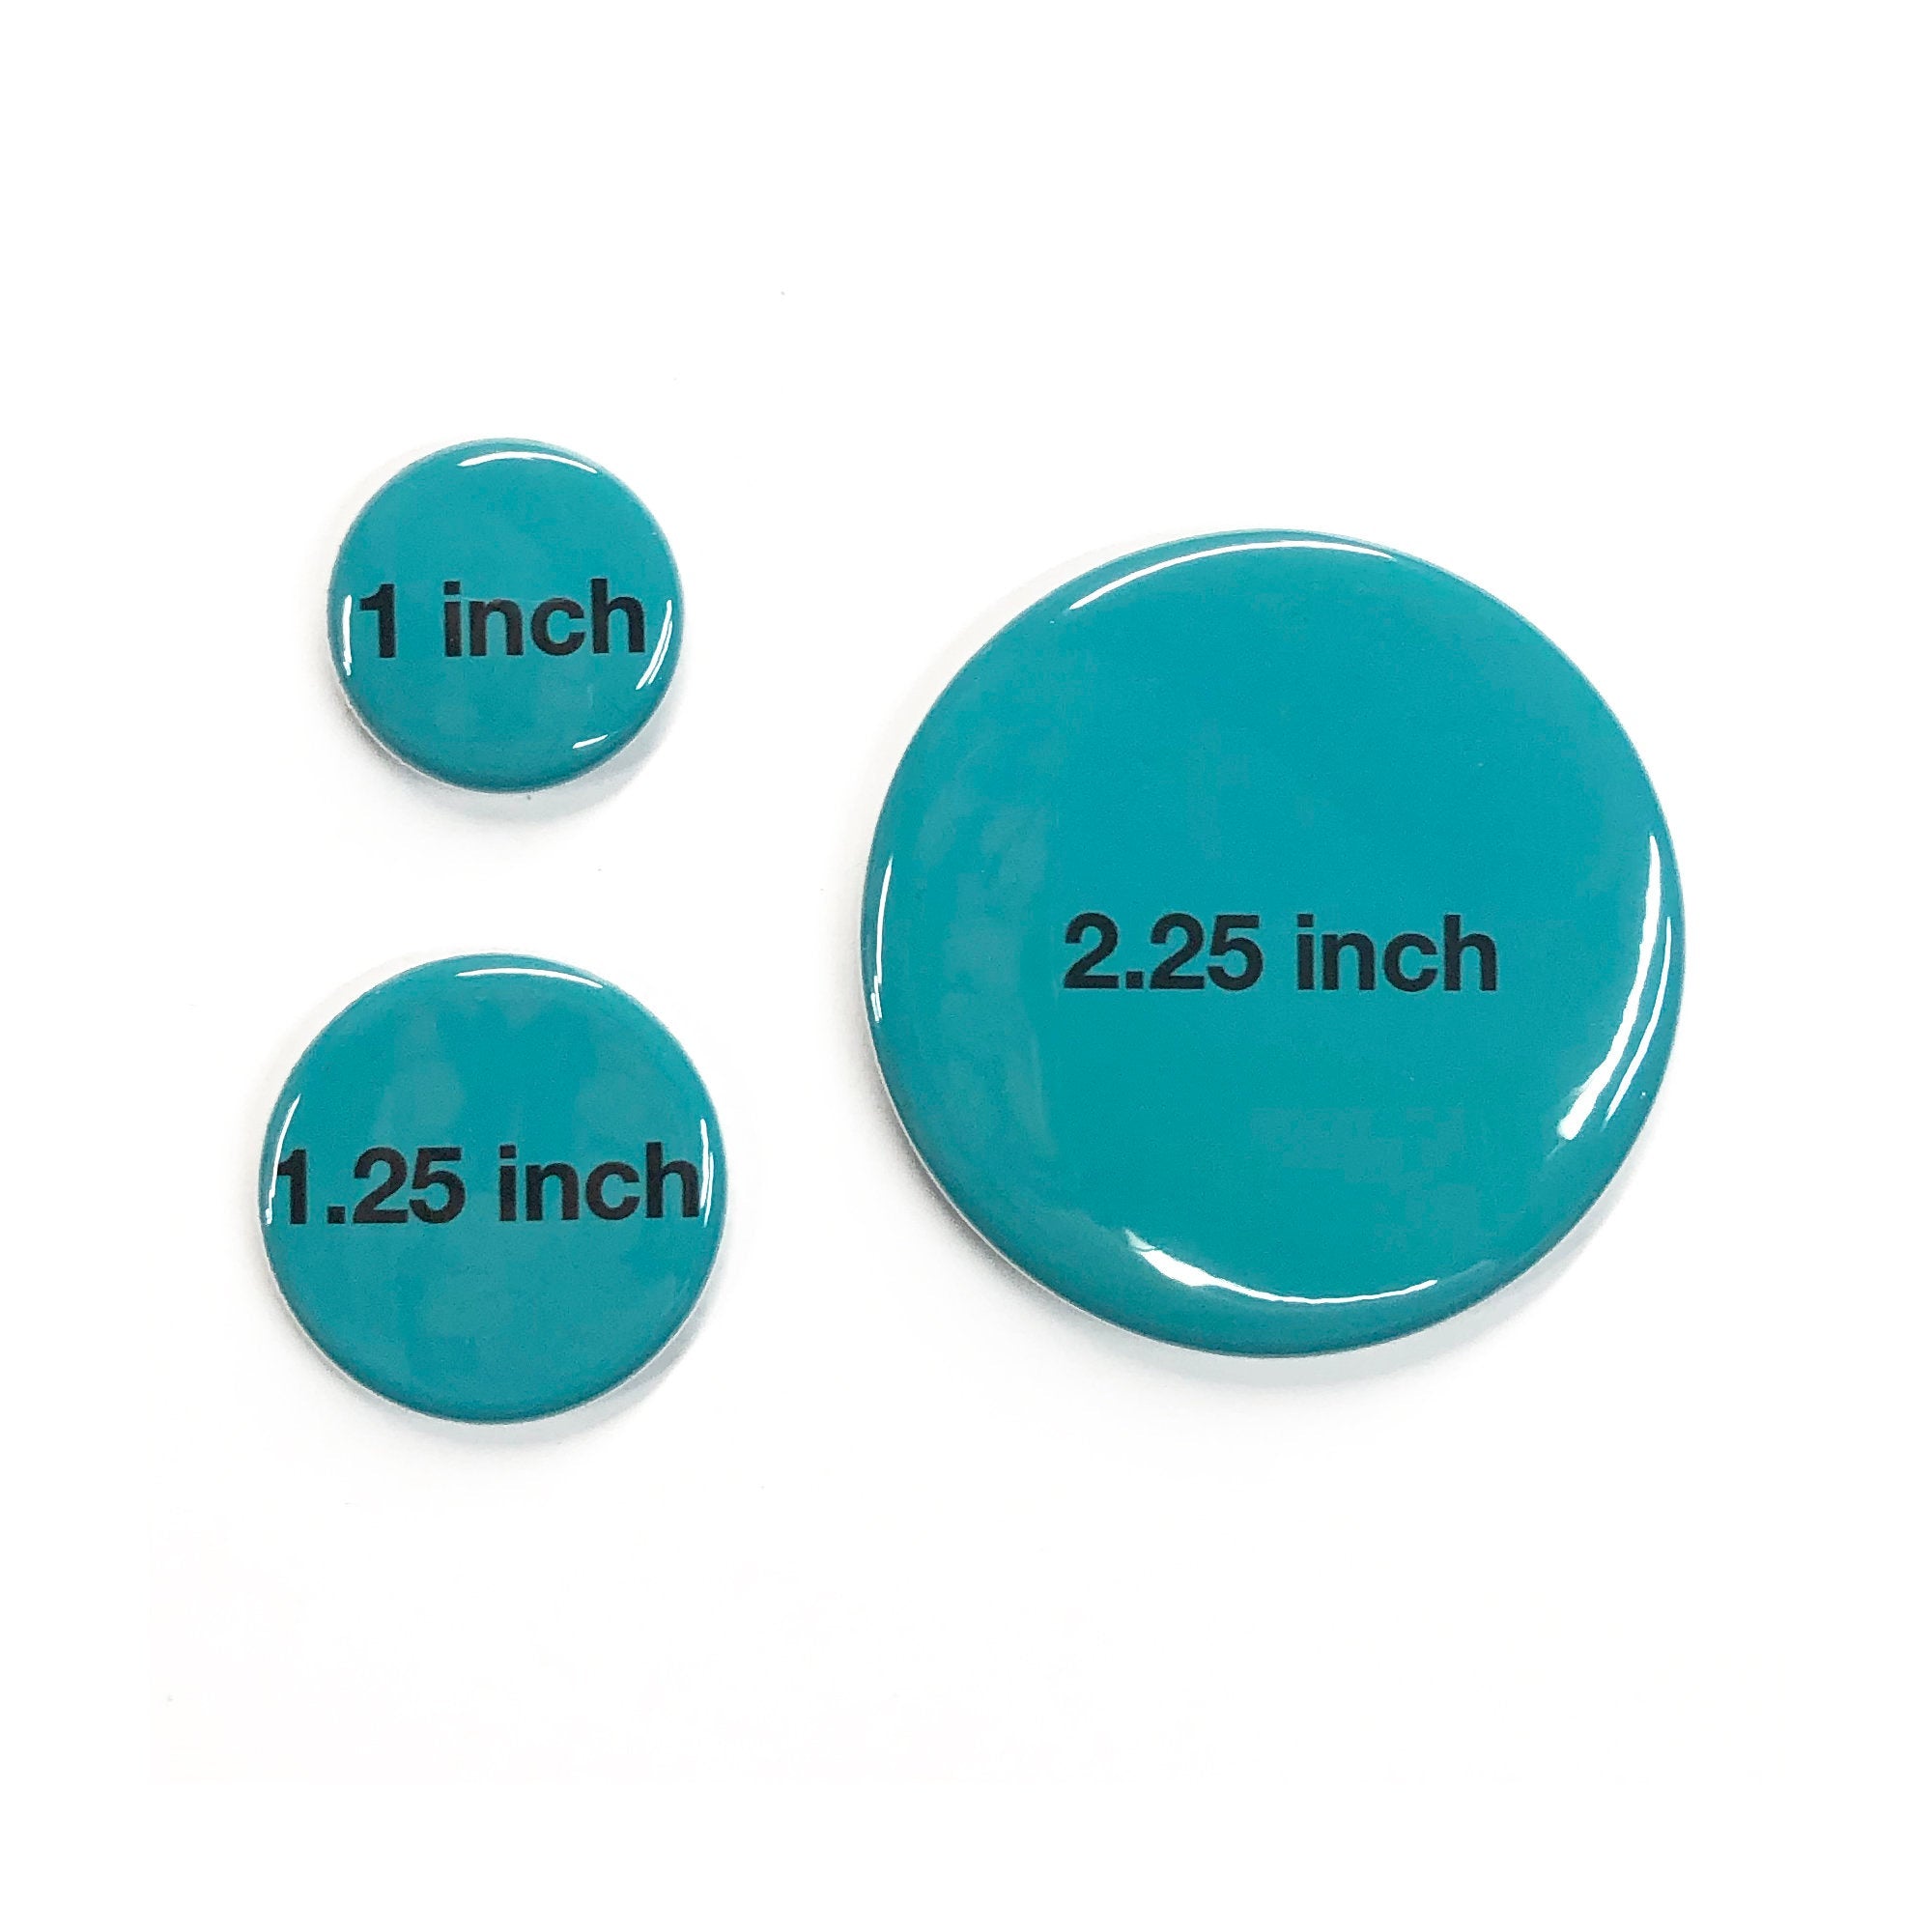 Social Distancing Pin Back Button, Magnet, or Pocket Mirror